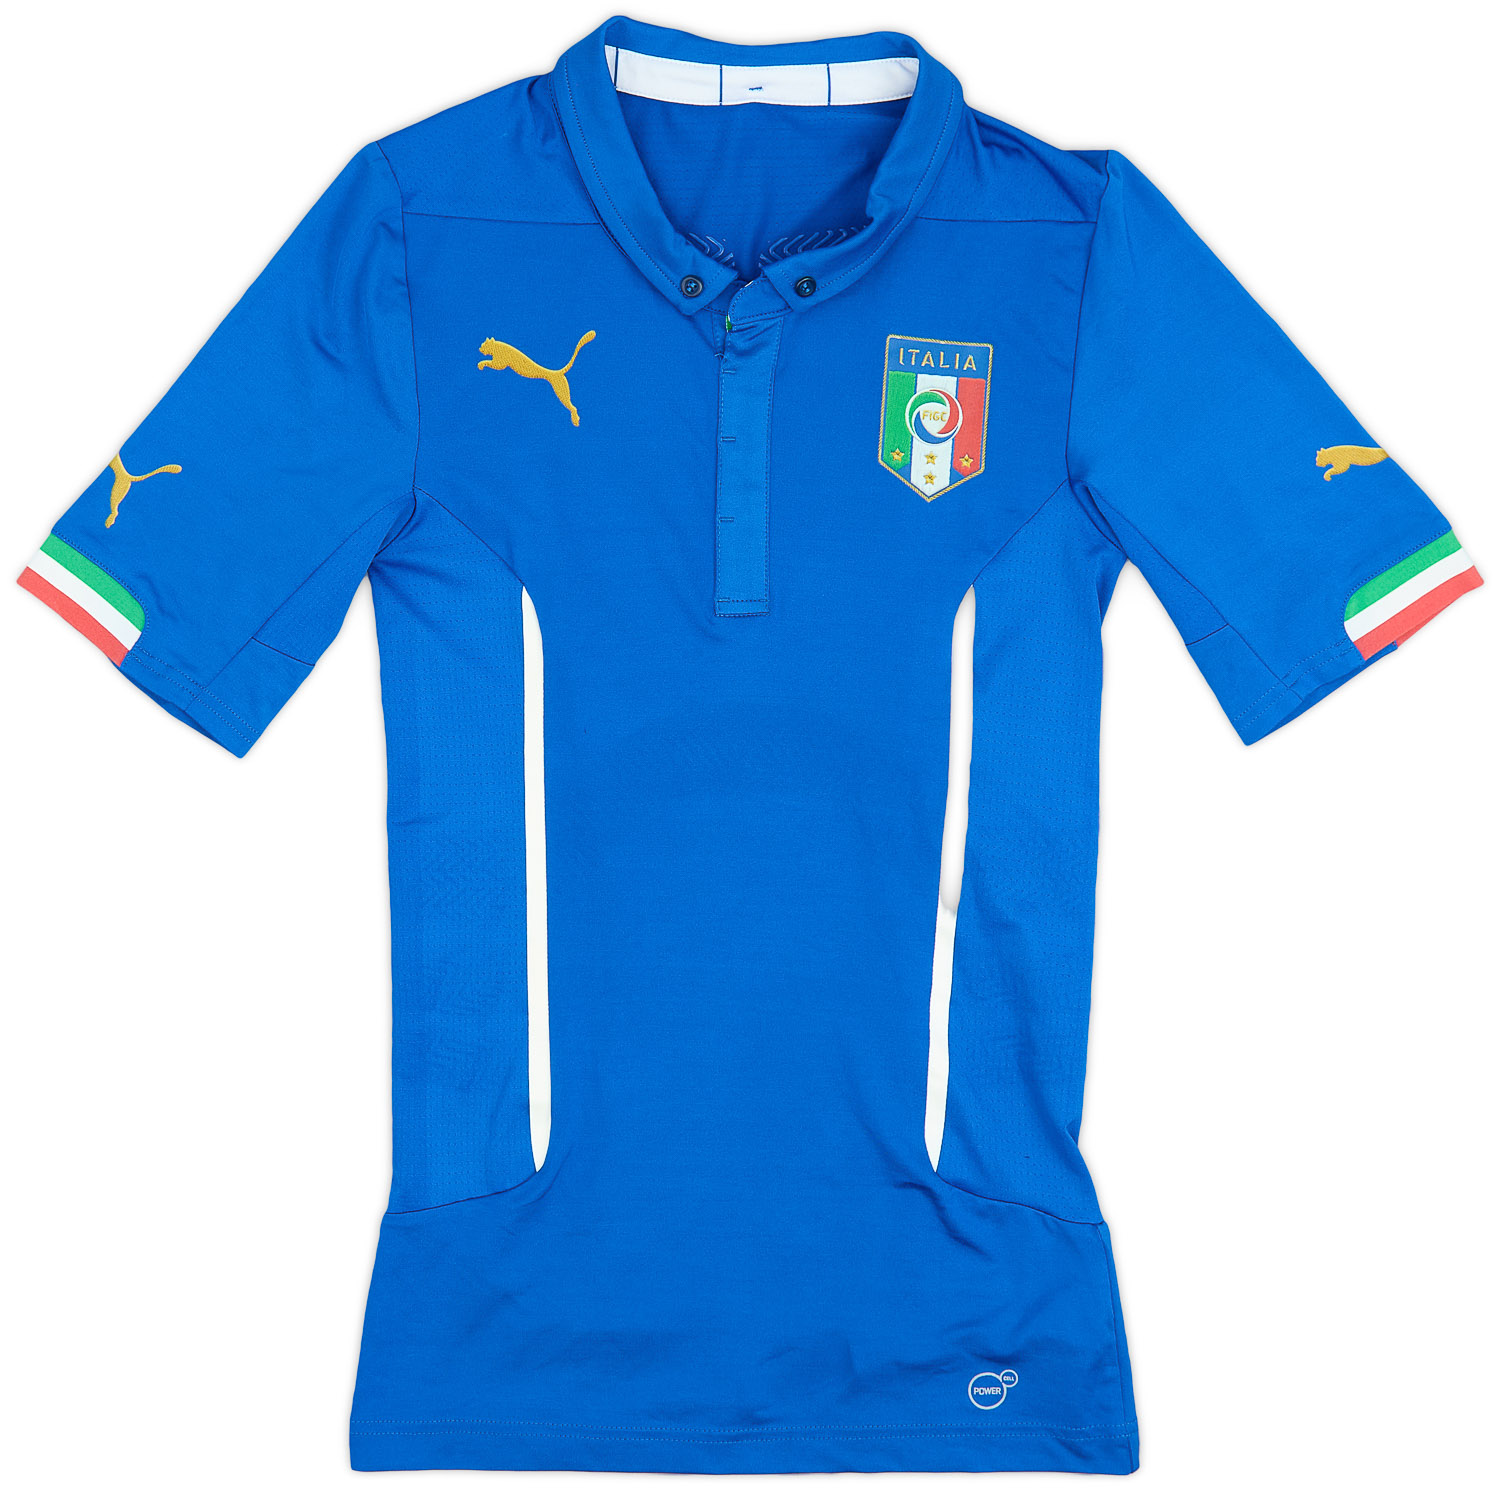 2014-15 Italy Authentic Home Shirt - 8/10 - ()